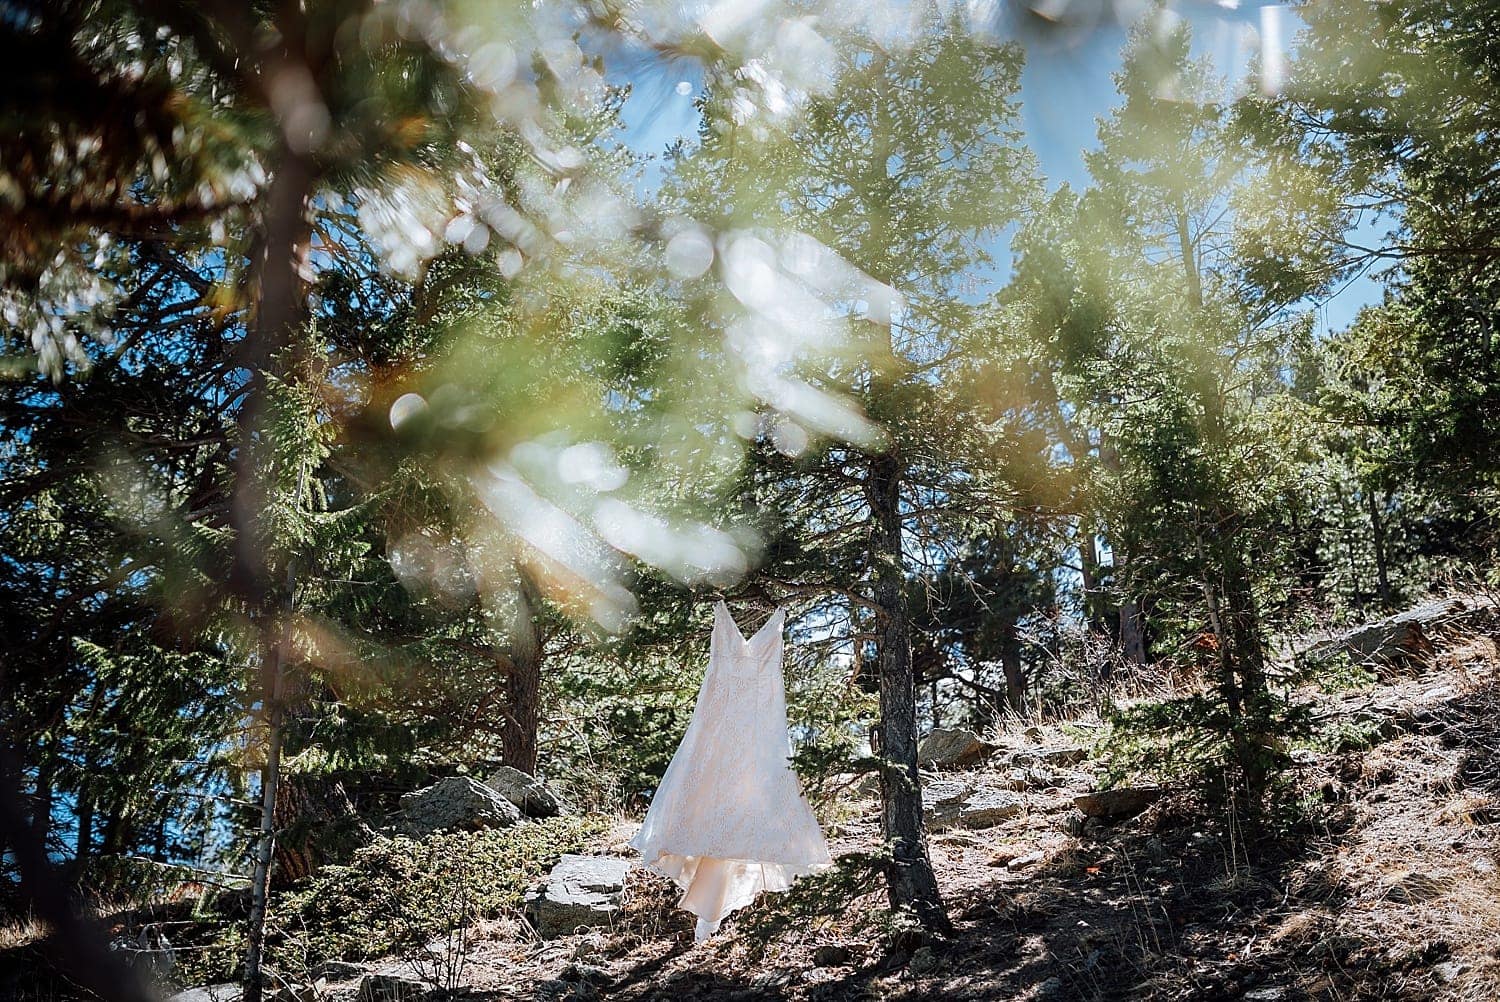 Bride's white dress hands from a tree branch in Estes Park, Colorado.